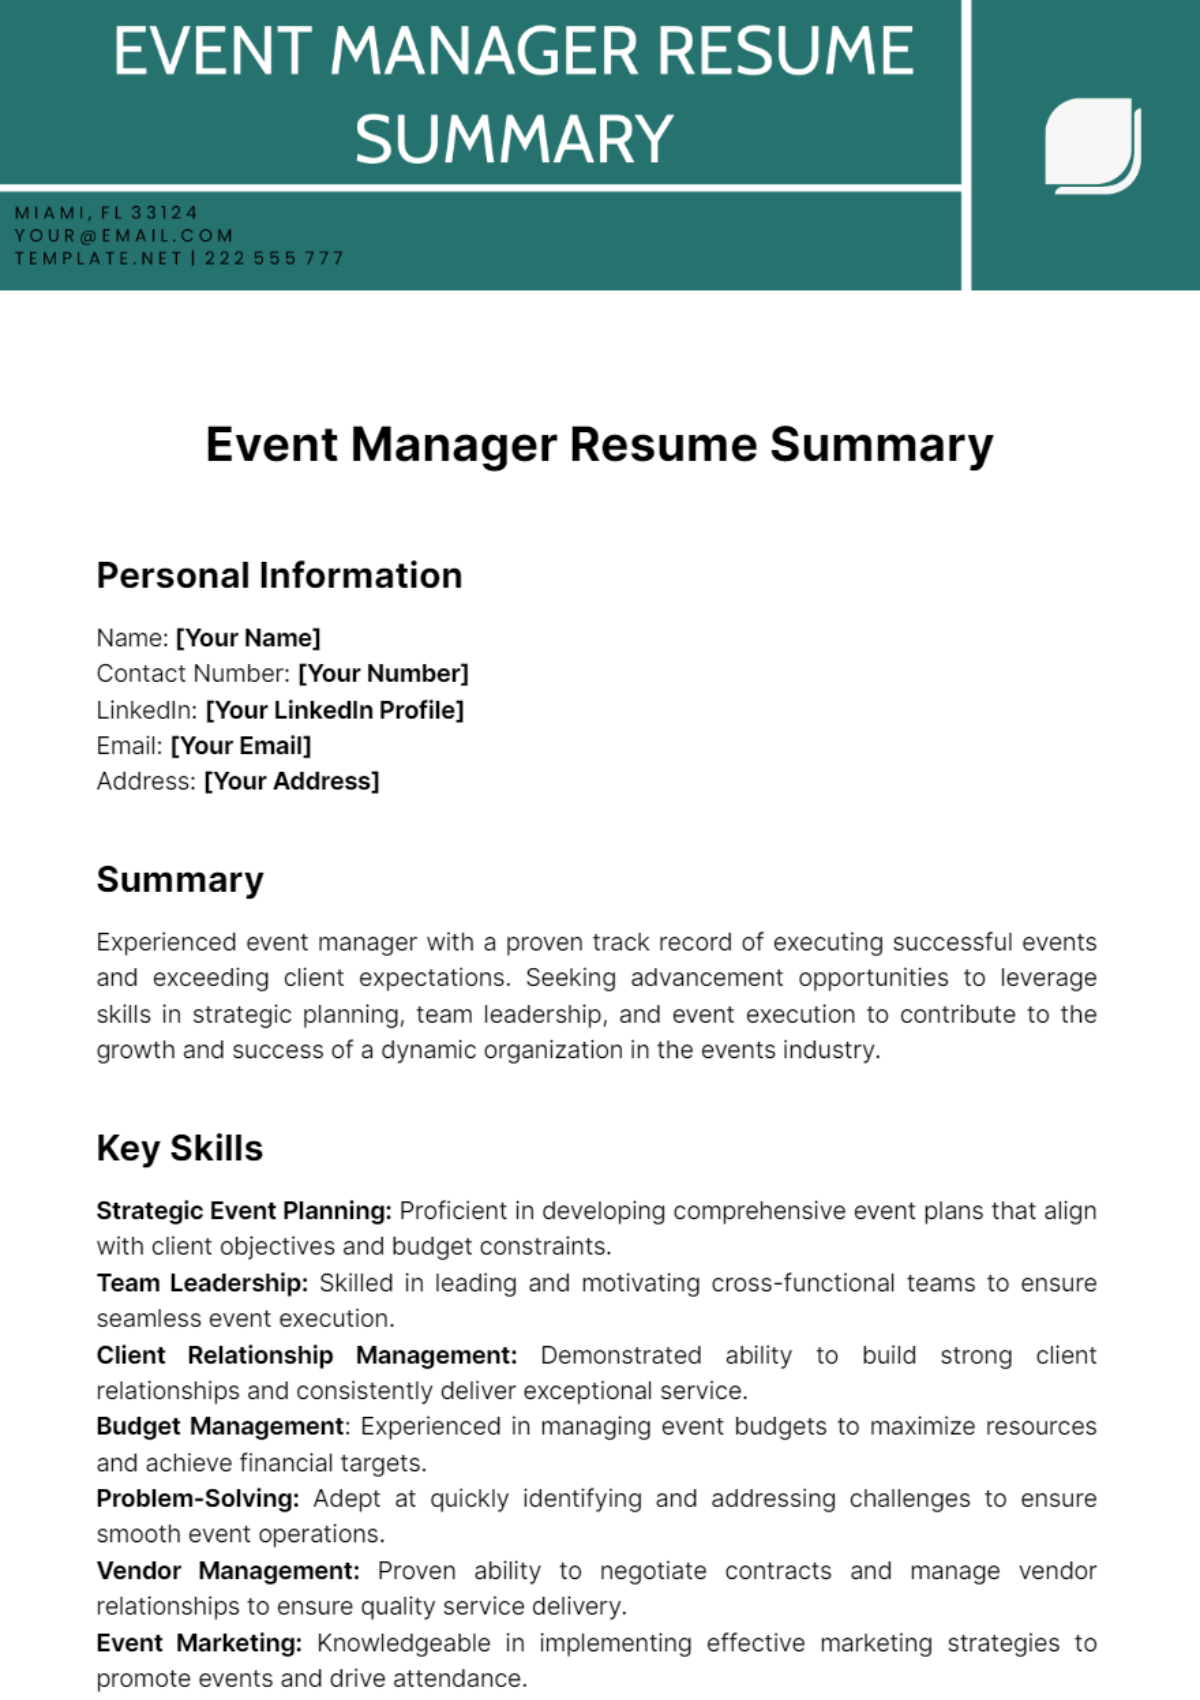 Event Manager Resume Summary Template